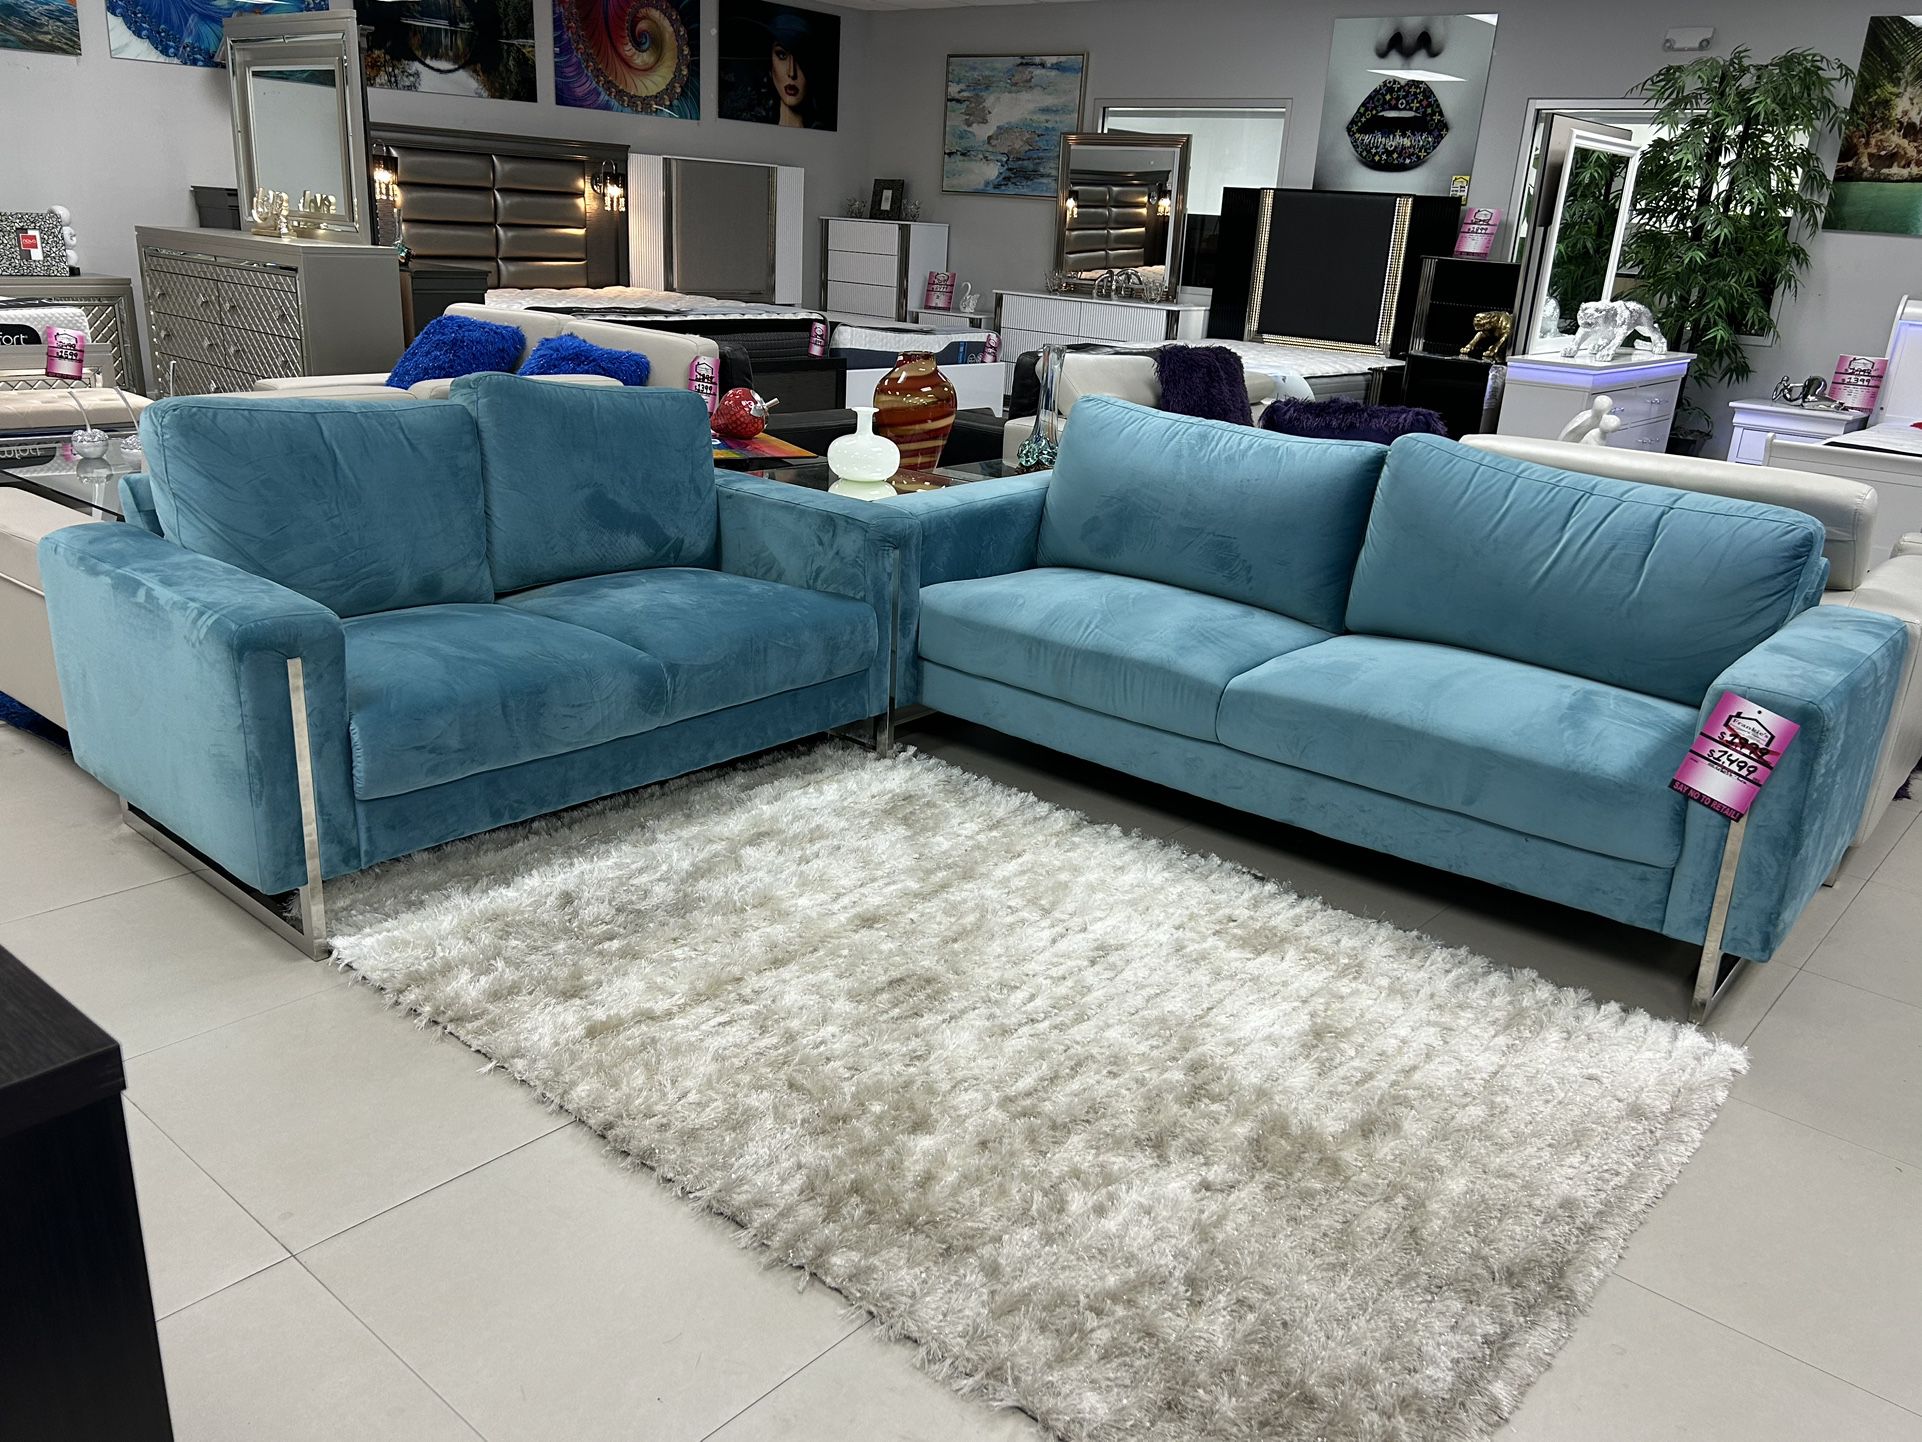 MODERN STATIONARY SOFA & LOVESEAT LIVING ROOM SET LIMITED STOCK OFFER ENDS 05/10 STORE CLOSING !!!!